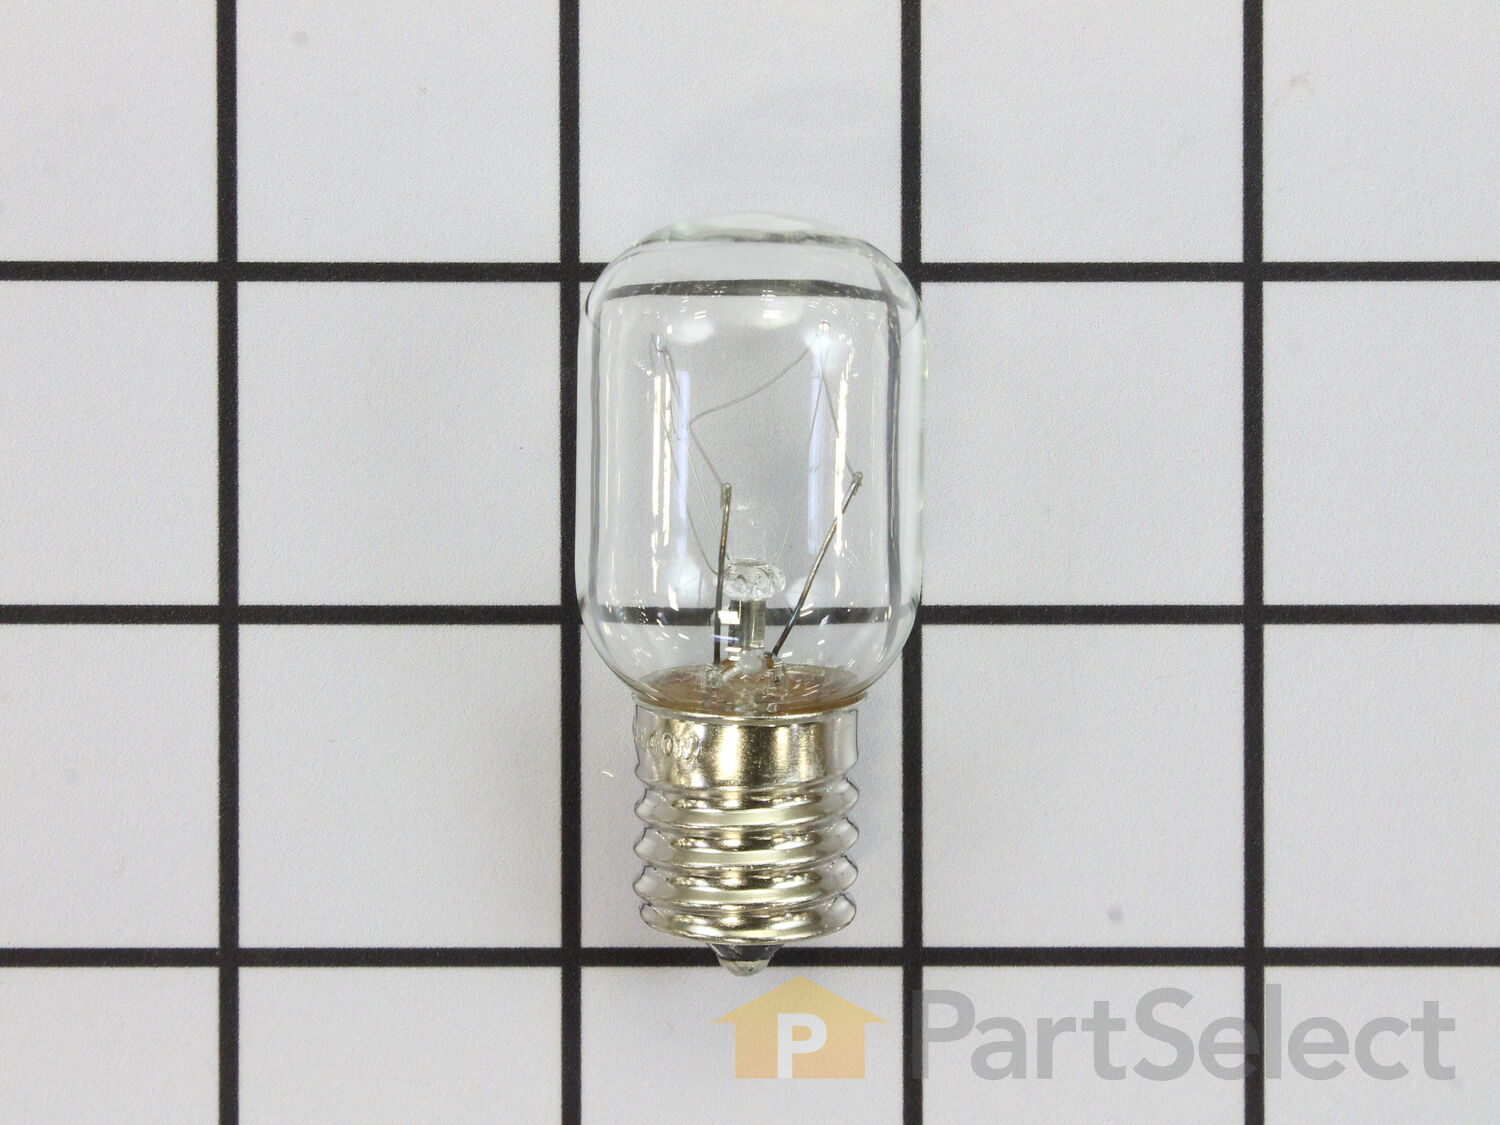 OHLGT 8206232A Microwave Light Bulb 40W E17 125V Replacement Part, Exact  Fit for